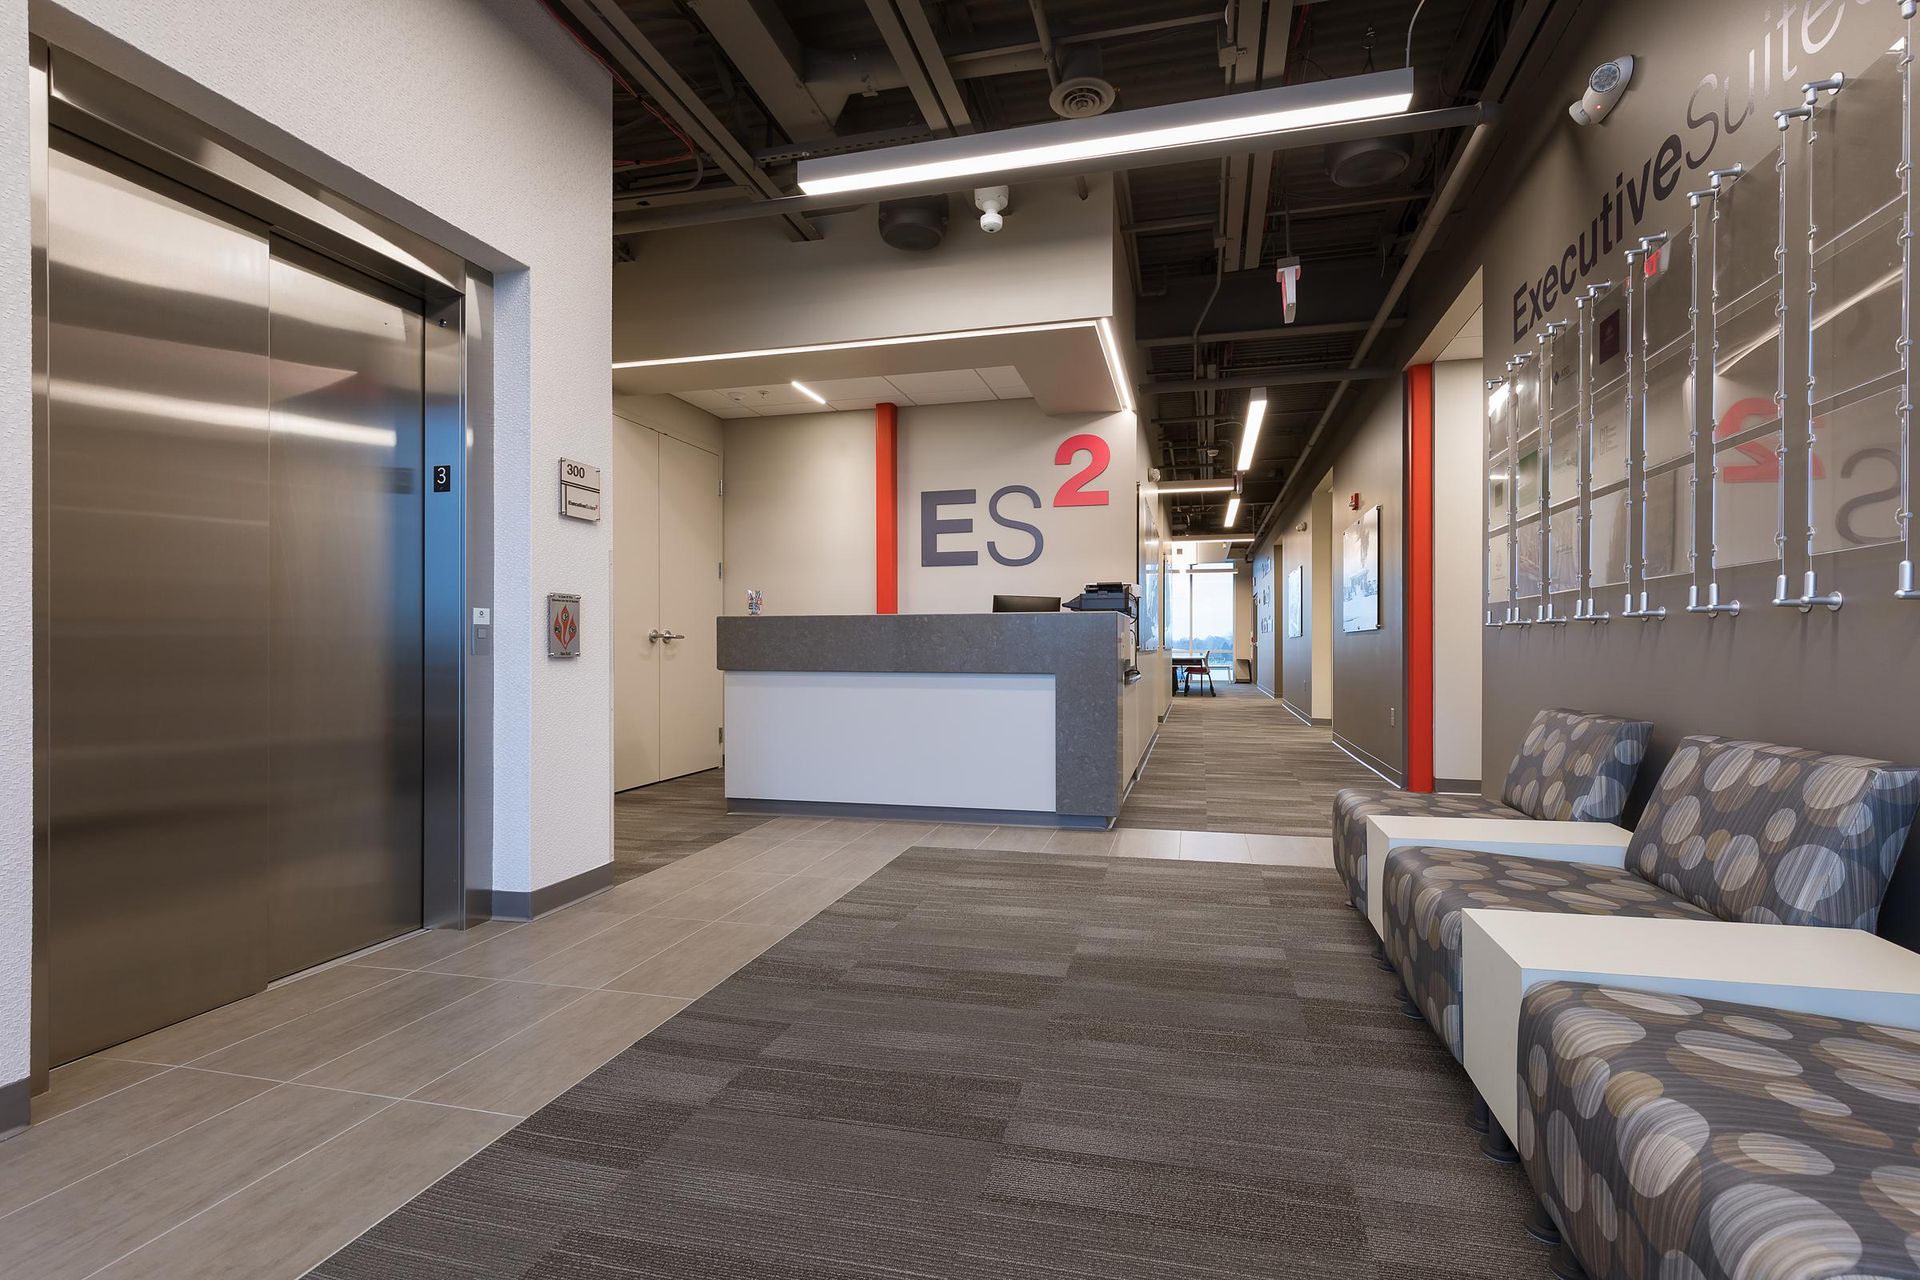 A lobby with a couch and a elevator and a sign that says es2